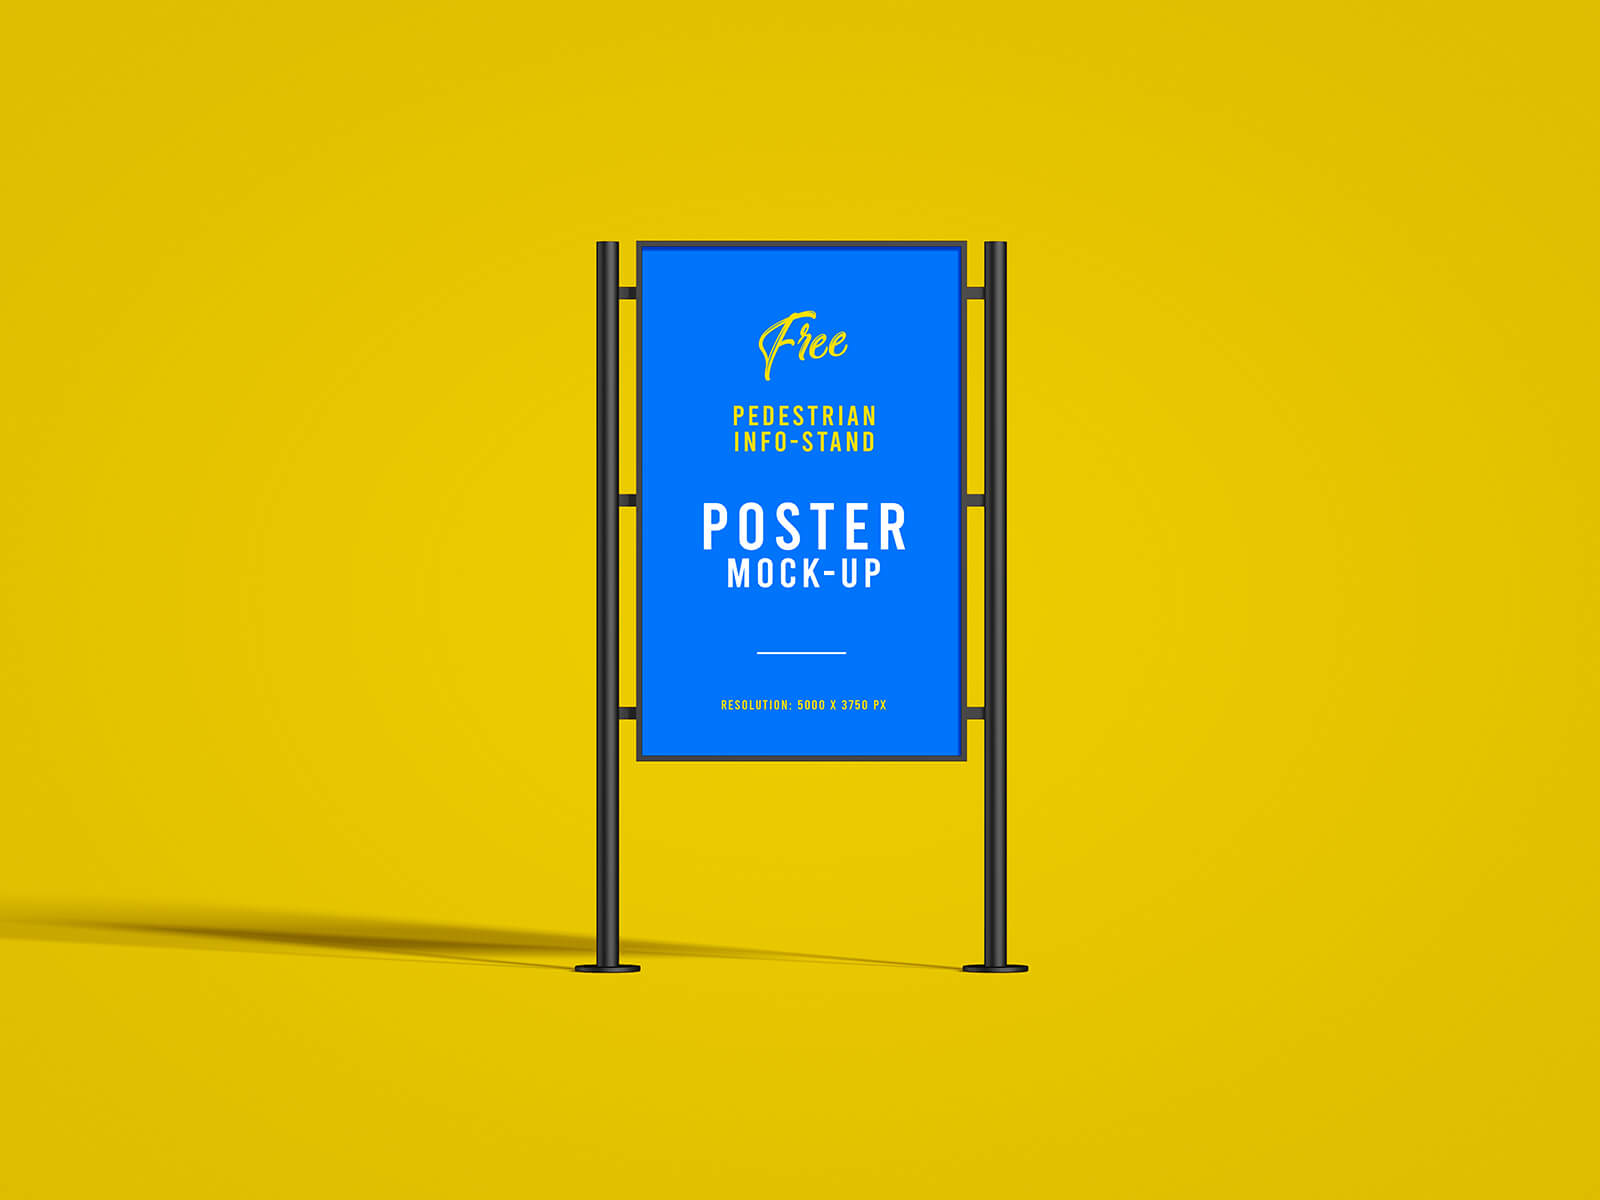 Free Pedestrian Info-Stand Poster Mockup PSD